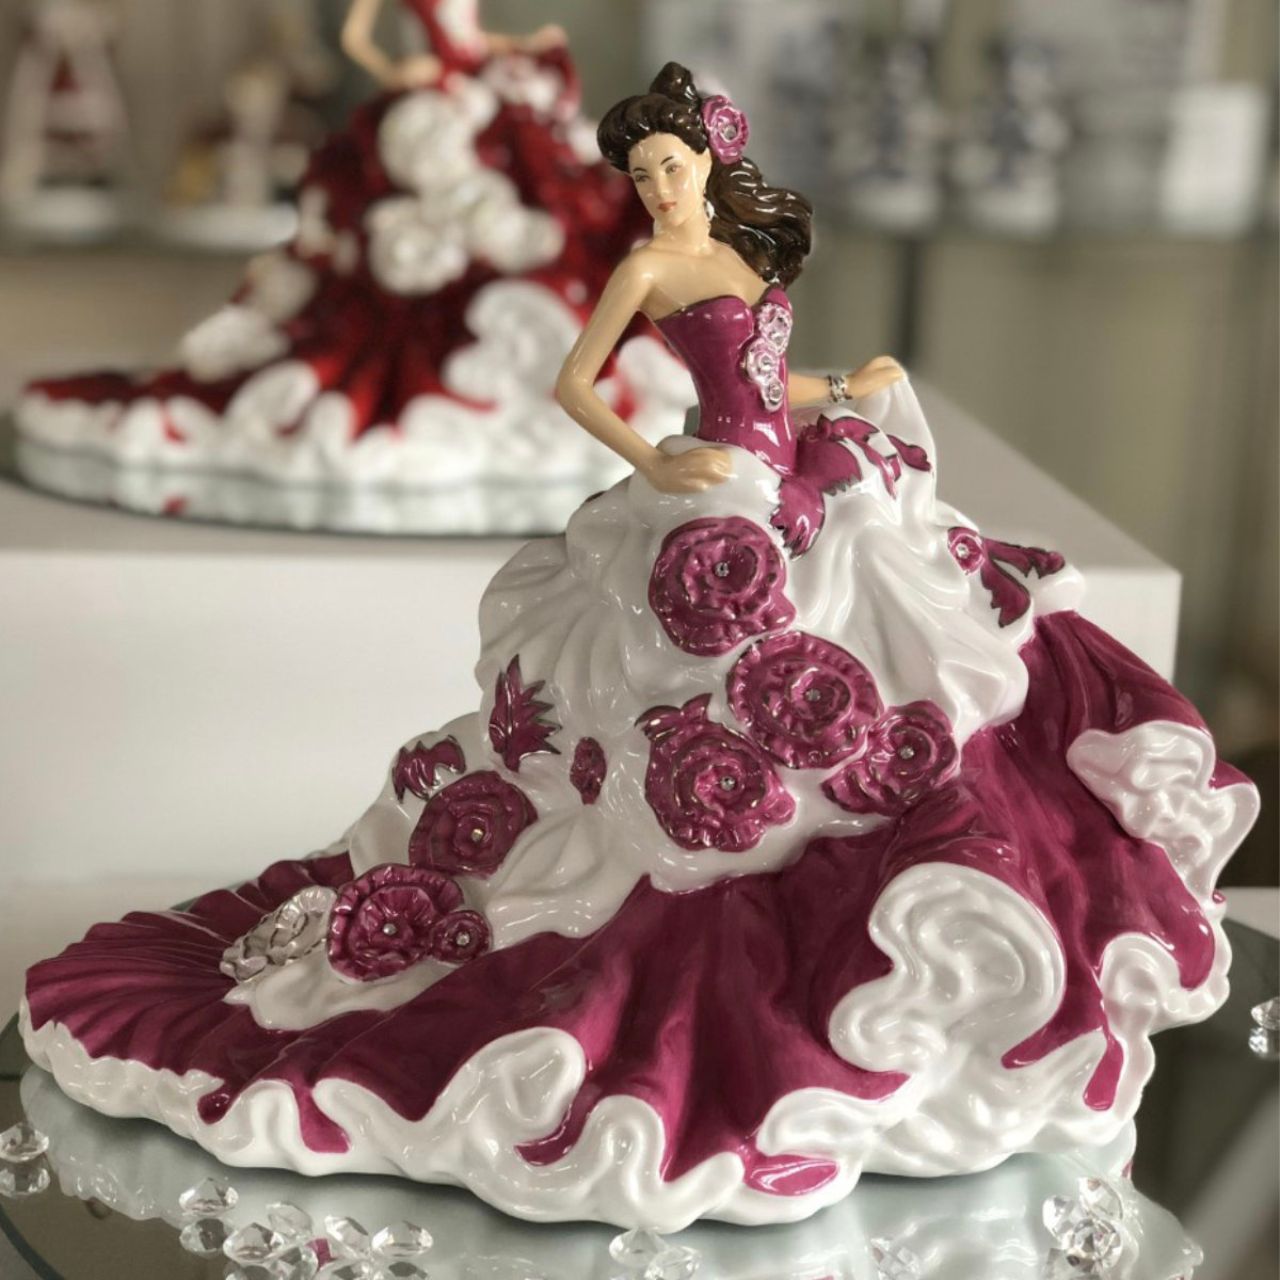 English Ladies Sweet Enchantment  Our fabulous Sweet Enchantment figurine is the latest figure in the English Ladies Co range. Designed and modelled by Valerie Annand, every piece is hand made and decorated and features 24 real Swarowski® crystals. 